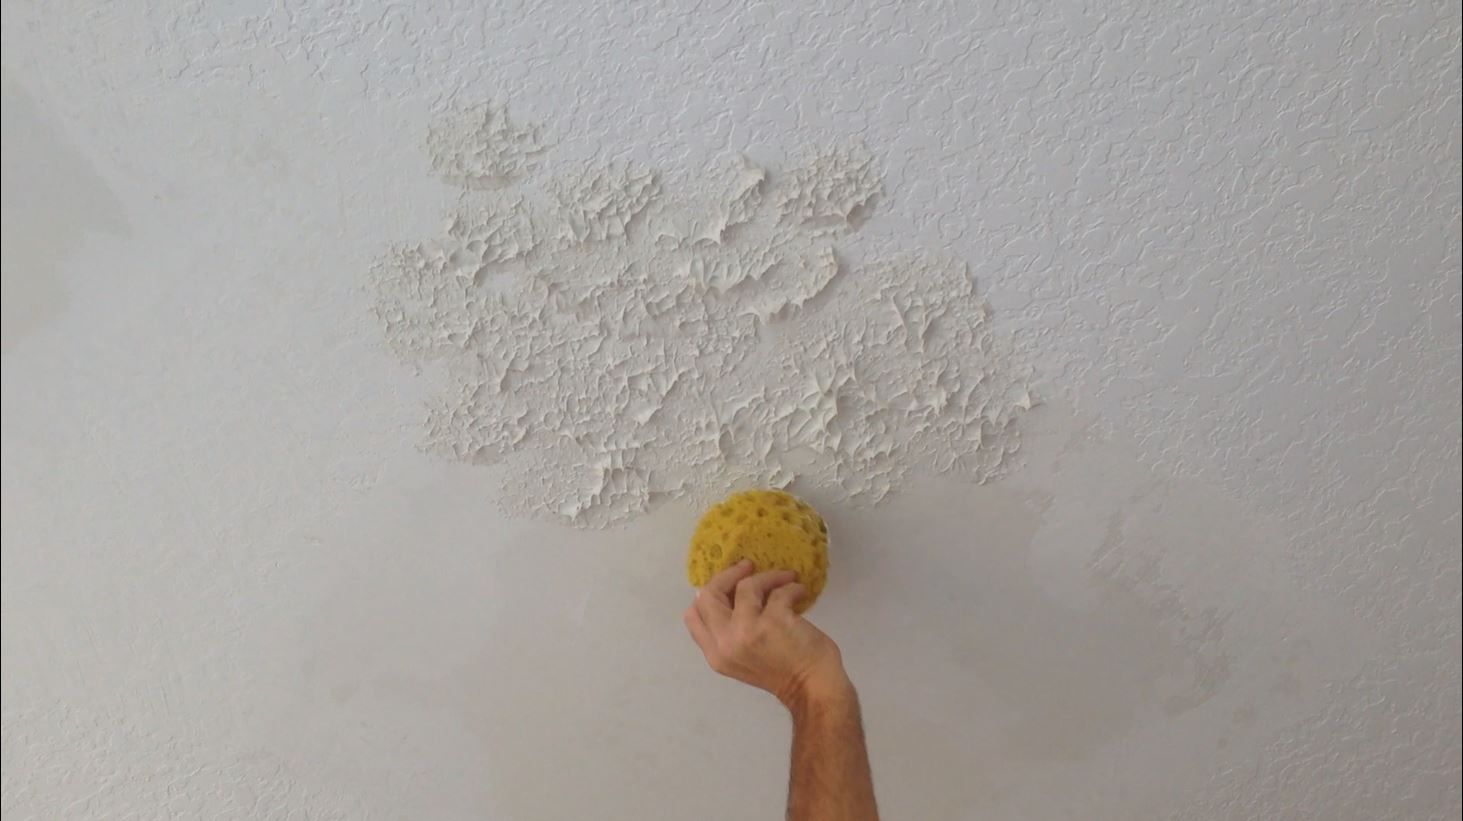 Knockdown Textures-South Florida Popcorn Ceiling Removal-We offer professional popcorn removal services, residential & commercial popcorn ceiling removal, Knockdown Texture, Orange Peel Ceilings, Smooth Ceiling Finish, and Drywall Repair